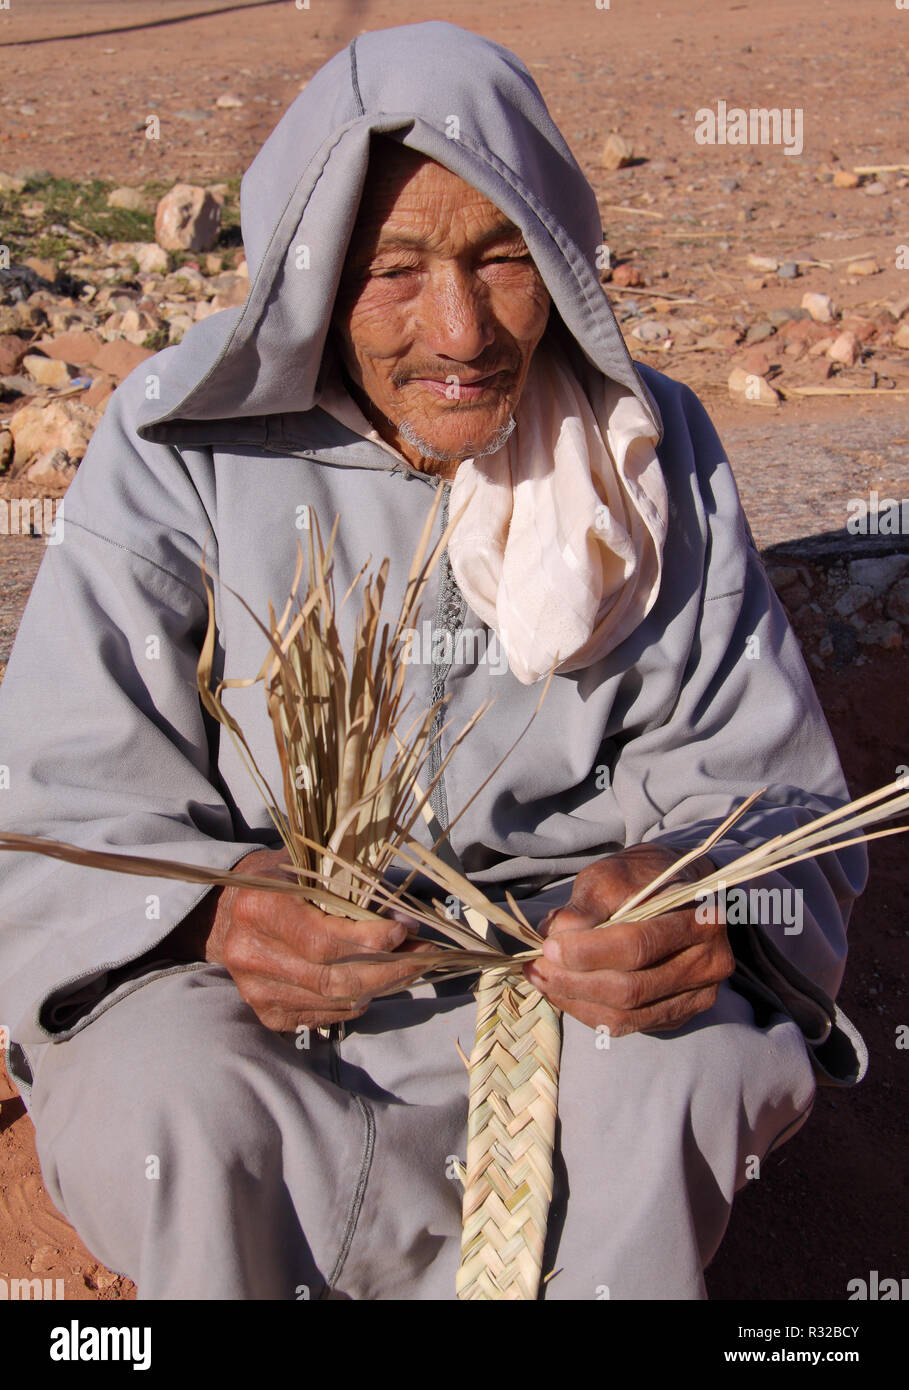 MARRAKESH, MOROCCO - 21,02,2012: A friendly old typically dressed Berber man crafts straps from straw in the foothills of the High Atlas Mountains. Stock Photo